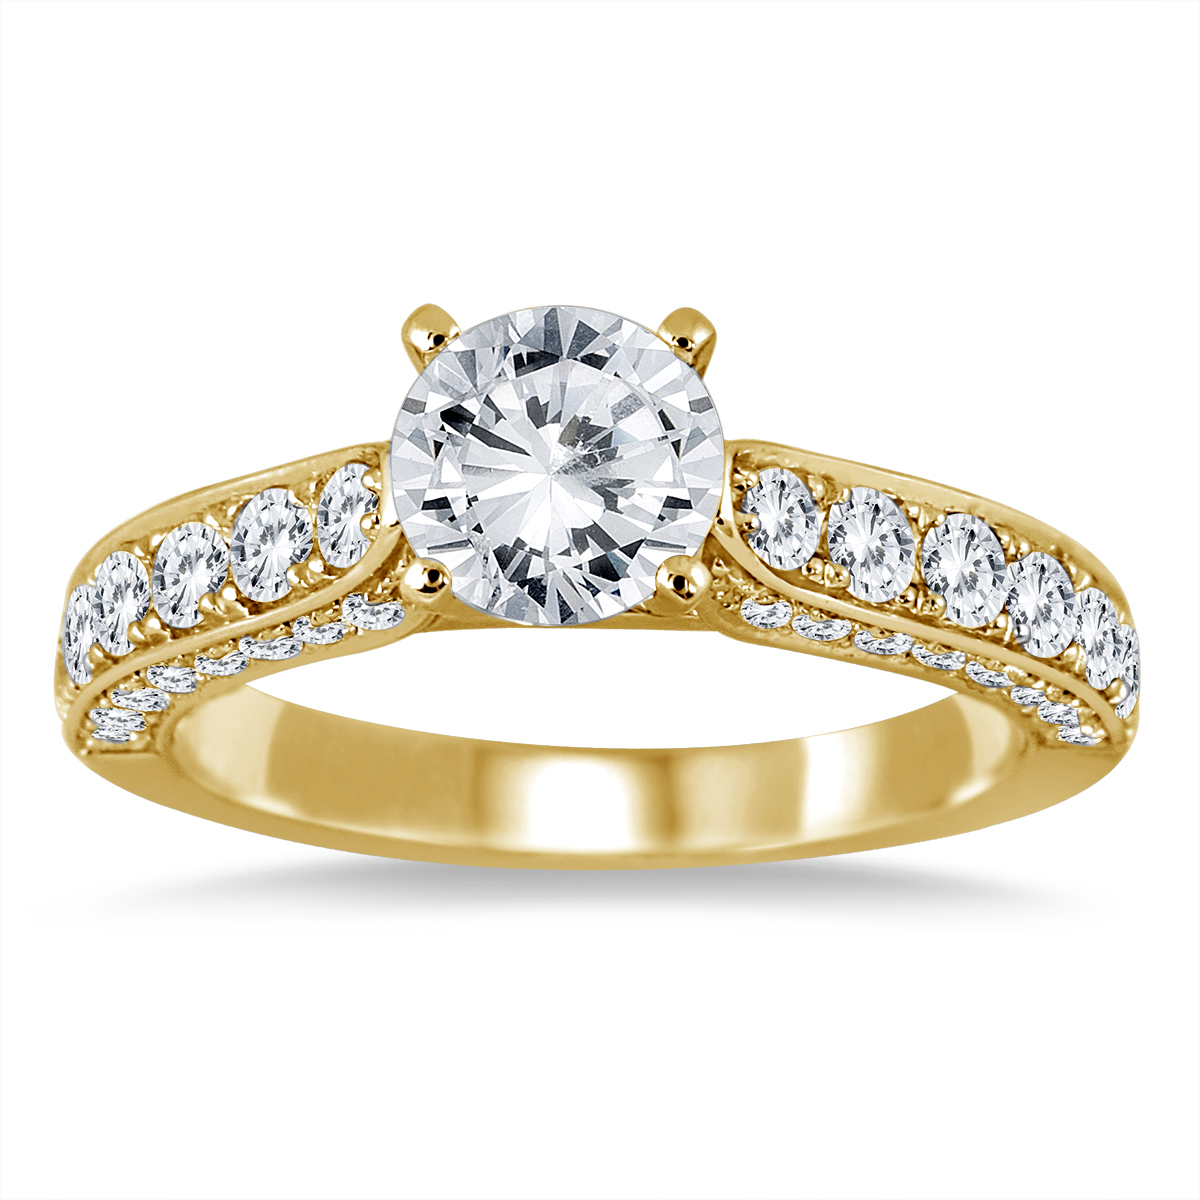 AGS Certified 1 7/8 Carat TW Diamond Ring in 14K Yellow Gold (H-I Color, I1-I2 Clarity)